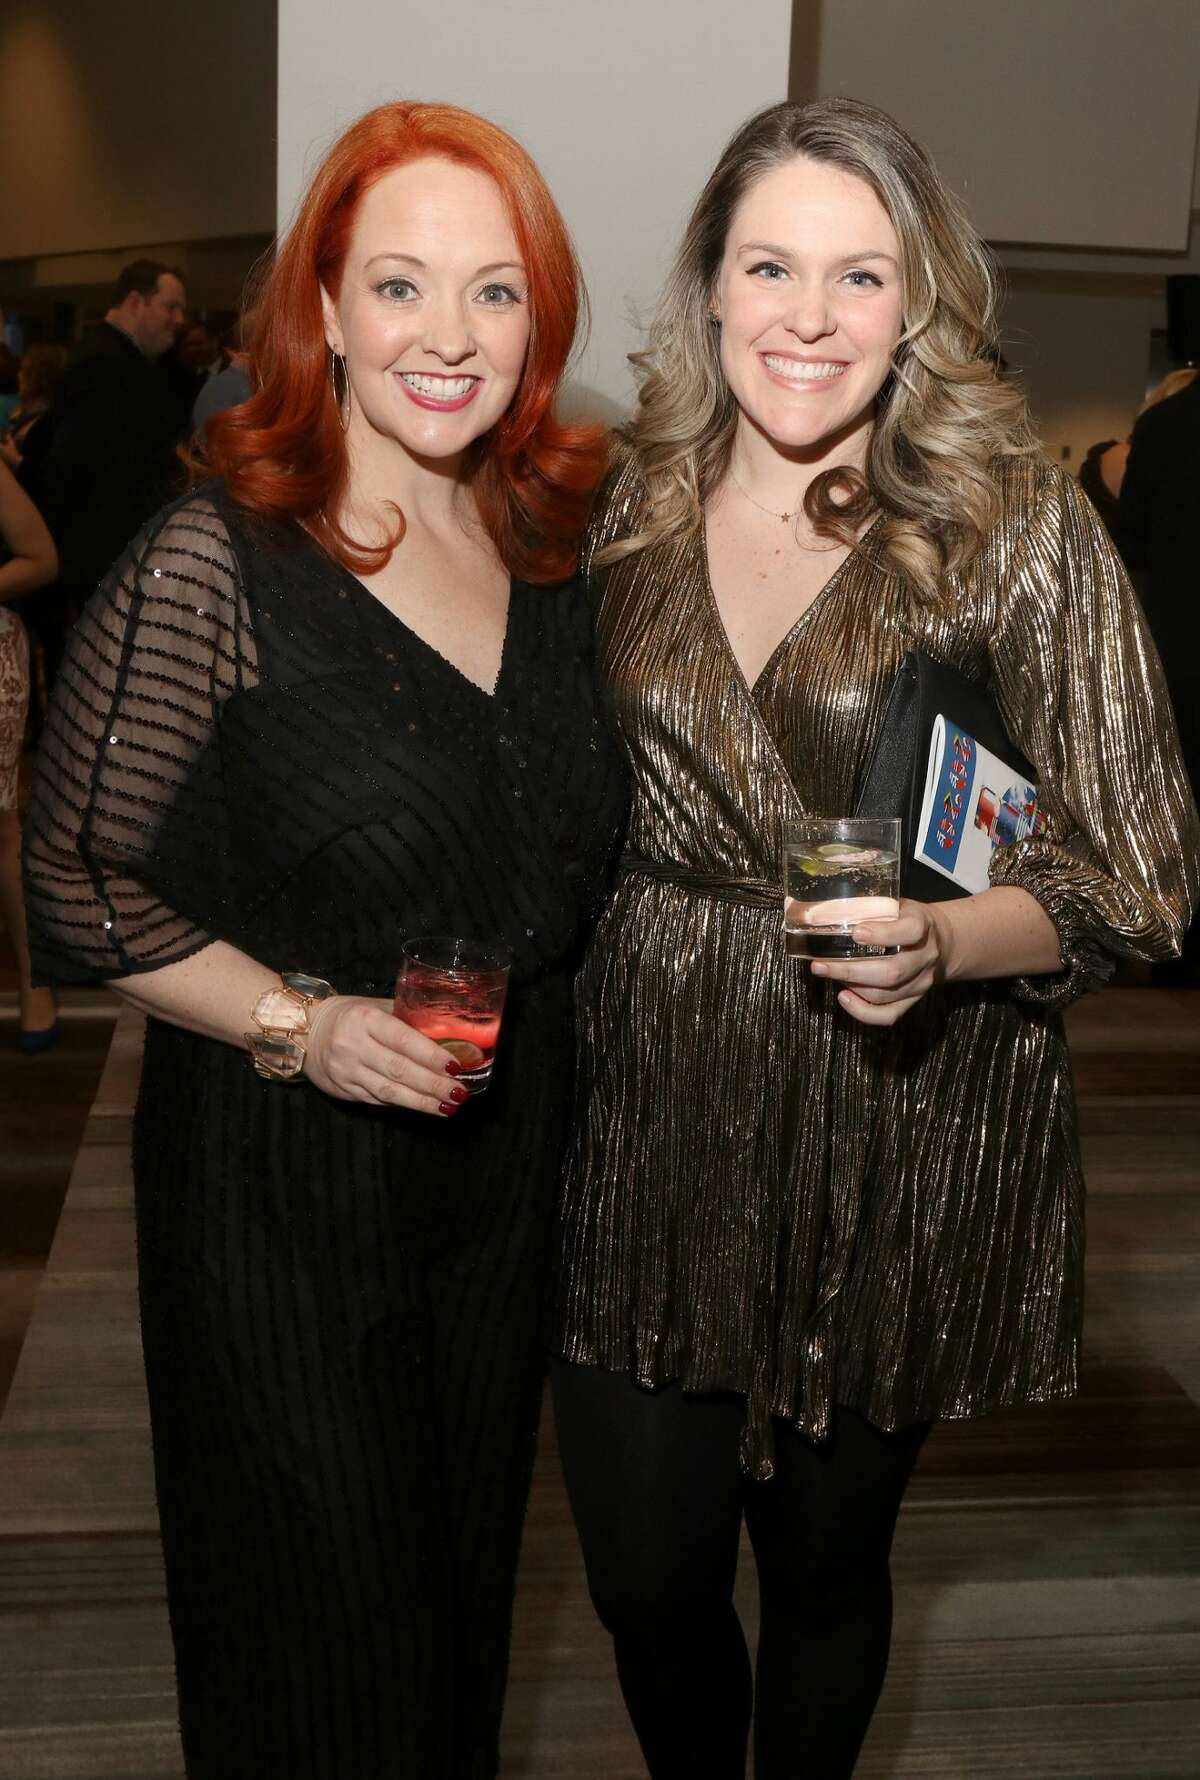 Were You Seen at the 11th Annual Albany Chefs’ Food & Wine Festival "Wine & Dine for the Arts" Grand Gala Reception and Dinner honoring the Purnomo family at the Albany Capital Center in Albany on Saturday, January 18, 2020?